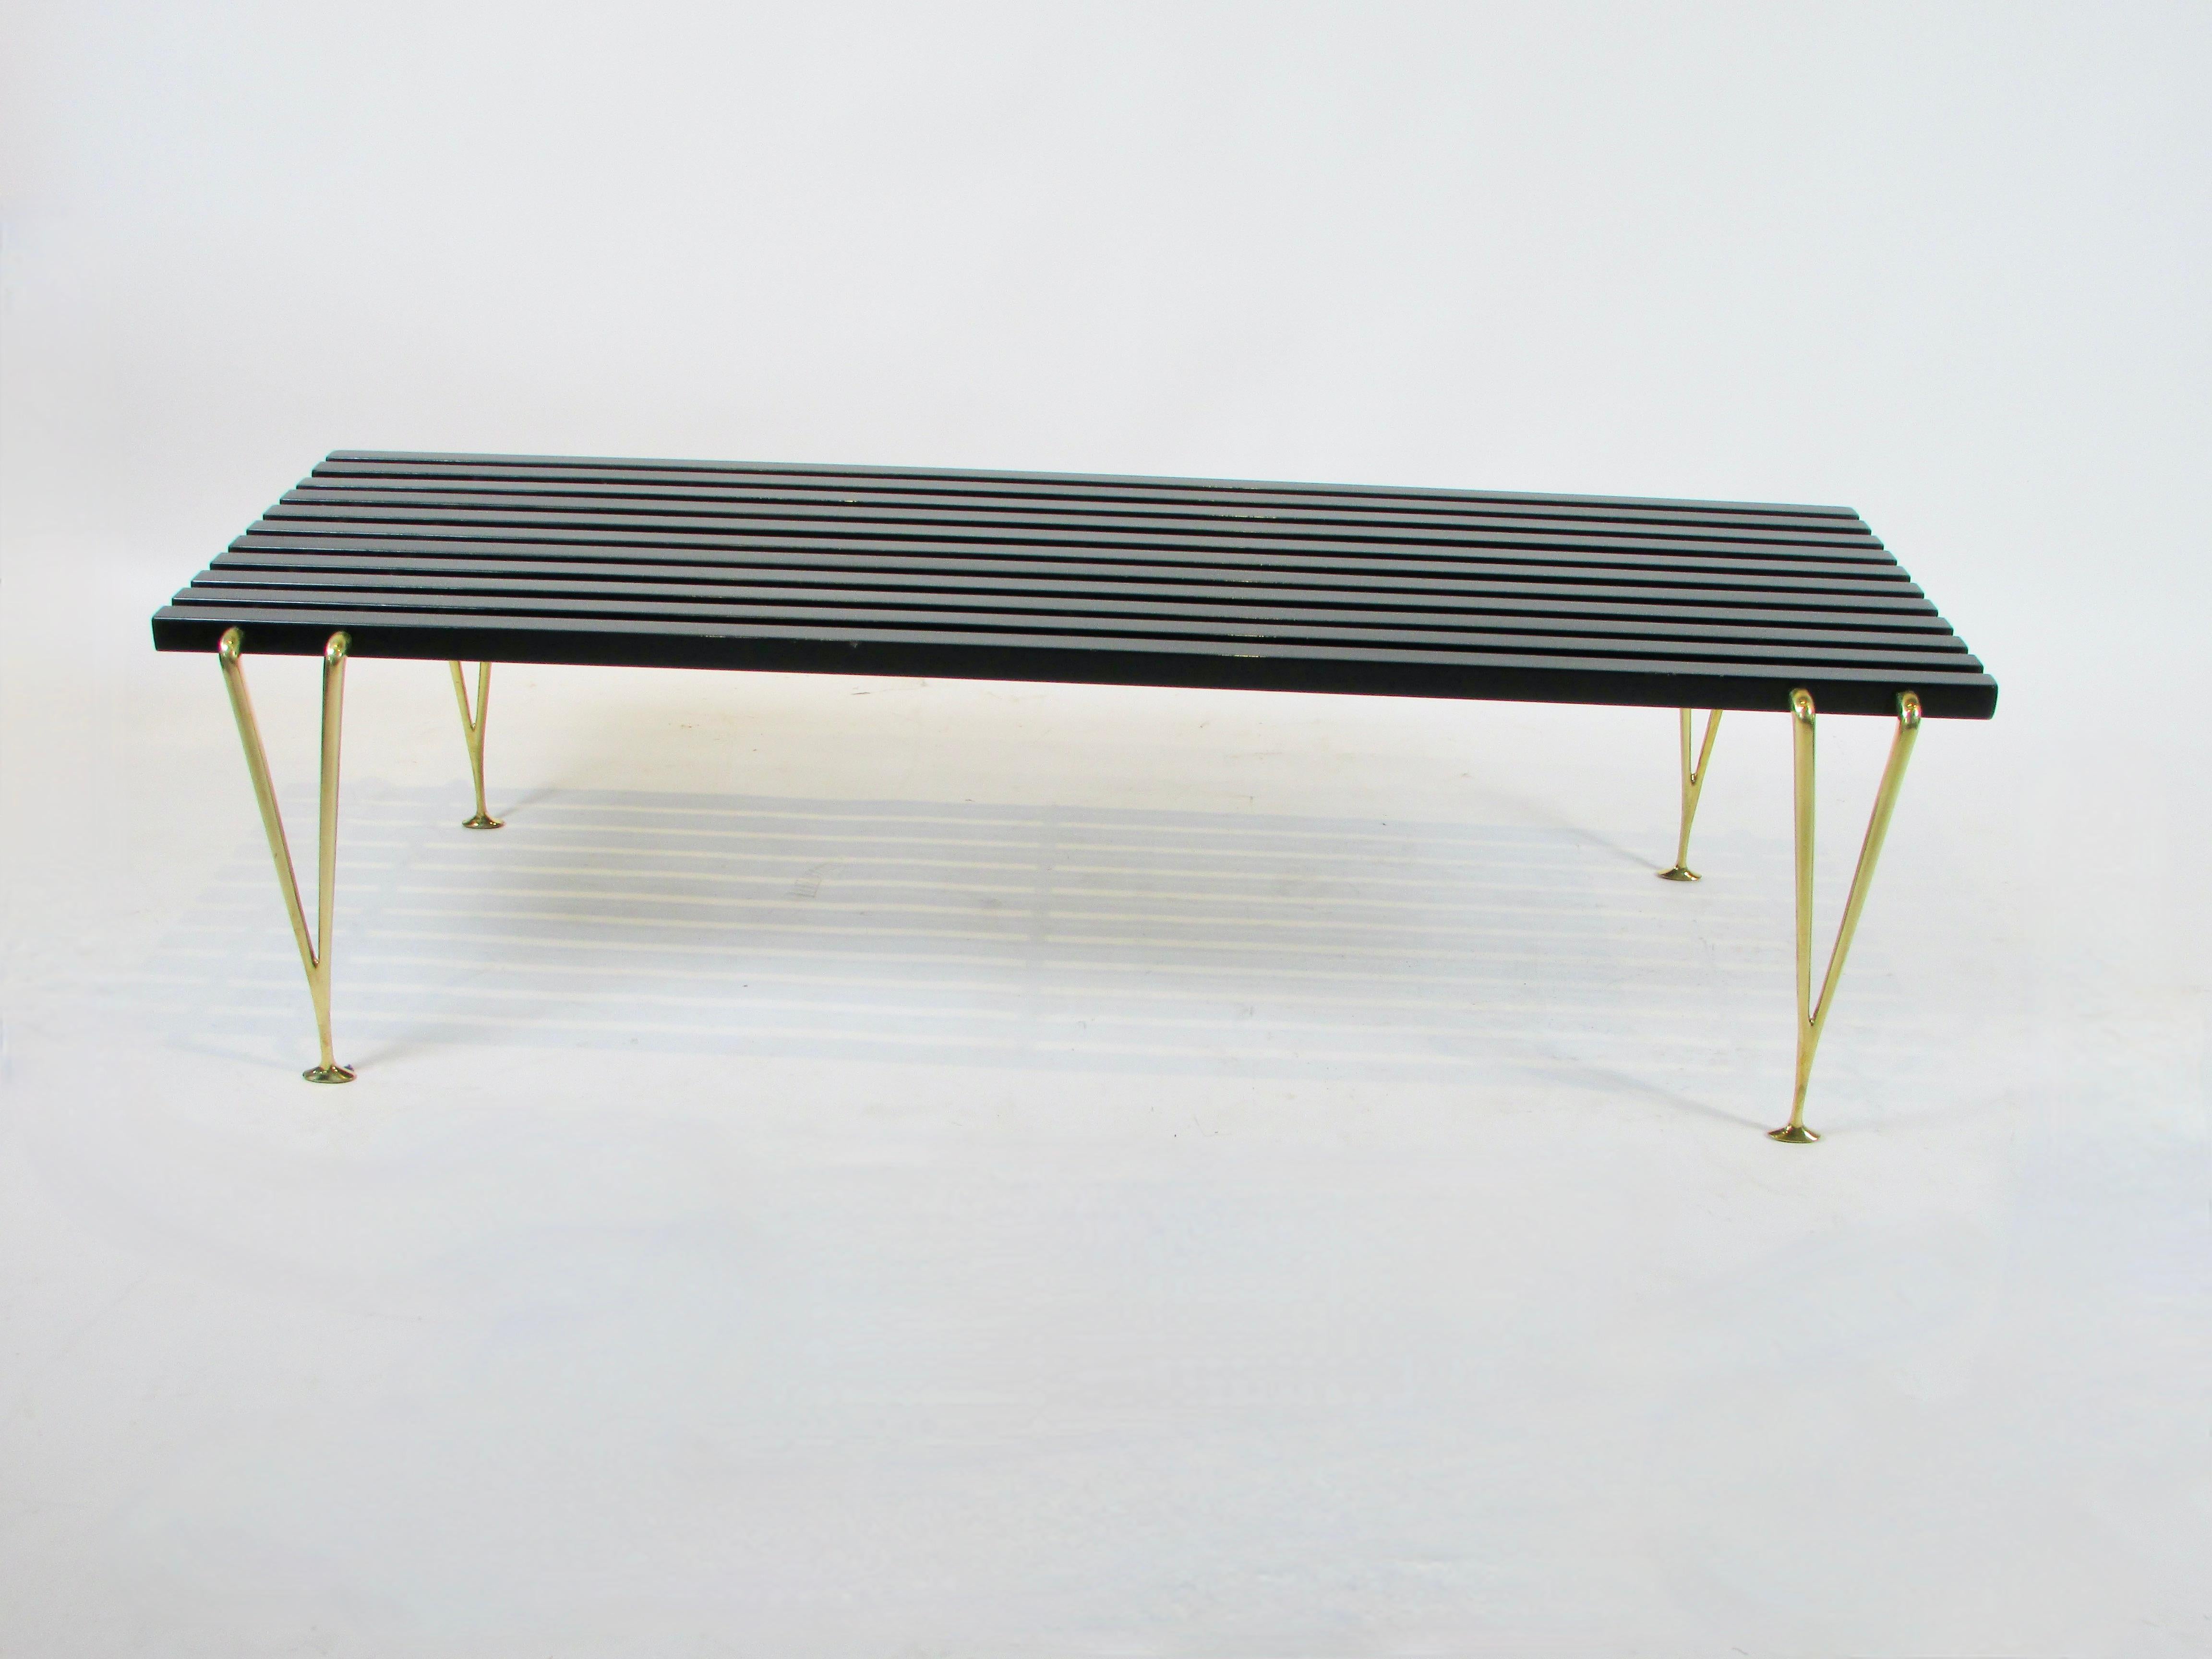 Polished Hugh Acton black slatted cocktail table or bench on brass legs  For Sale